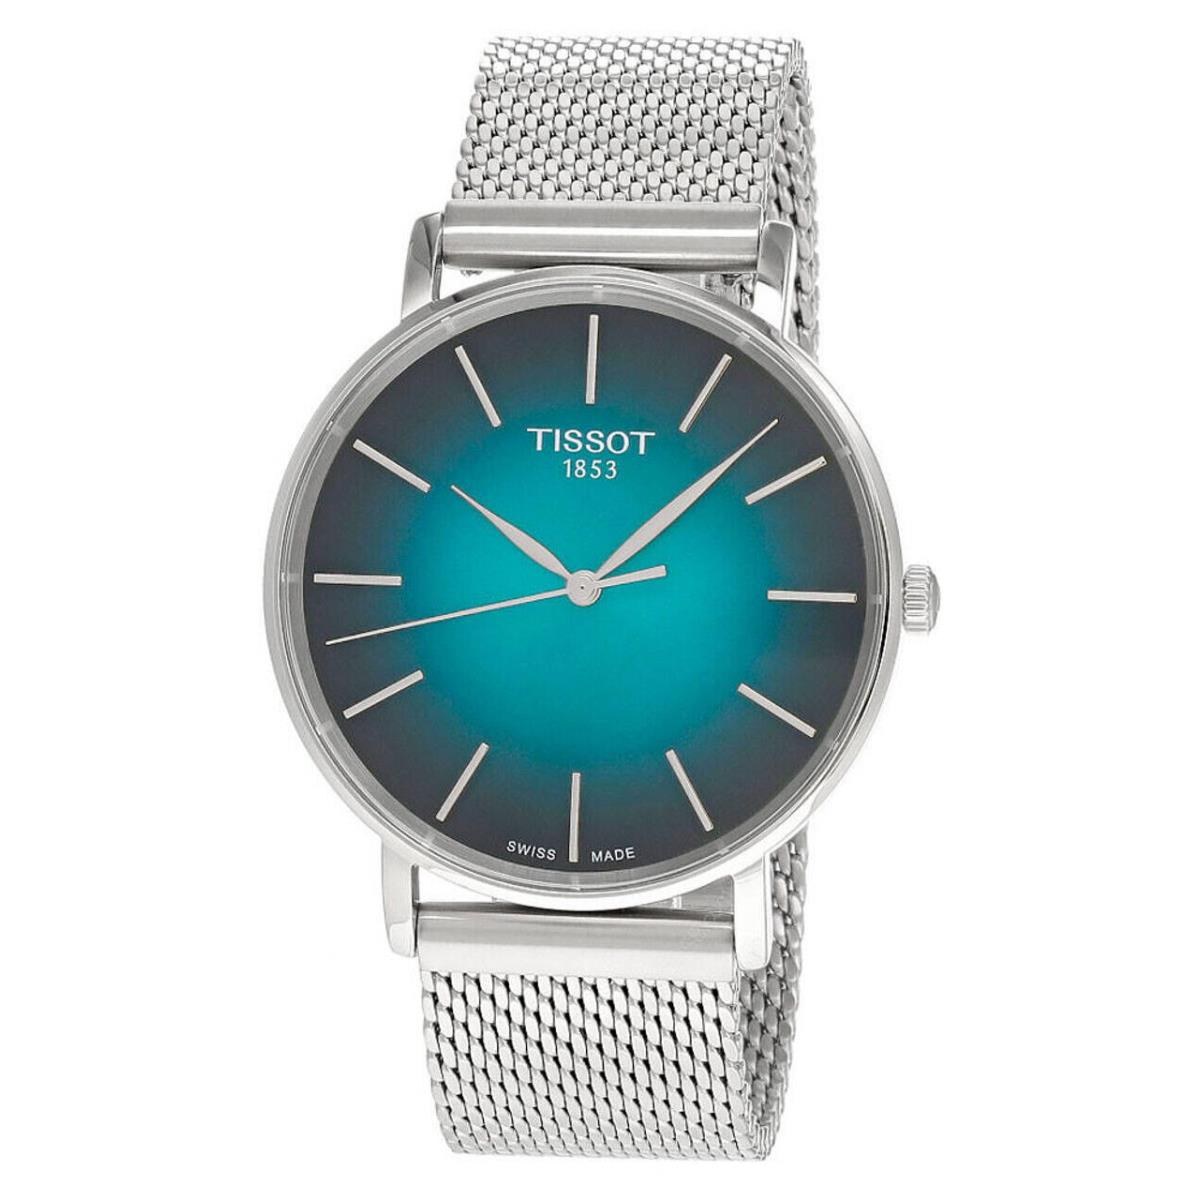 Tissot Everytime 40MM Graded Green-black Dial SS Men`s Watch T143.410.11.091.00 - Dial: Graded Green-Black, Band: Silver, Bezel: Silver